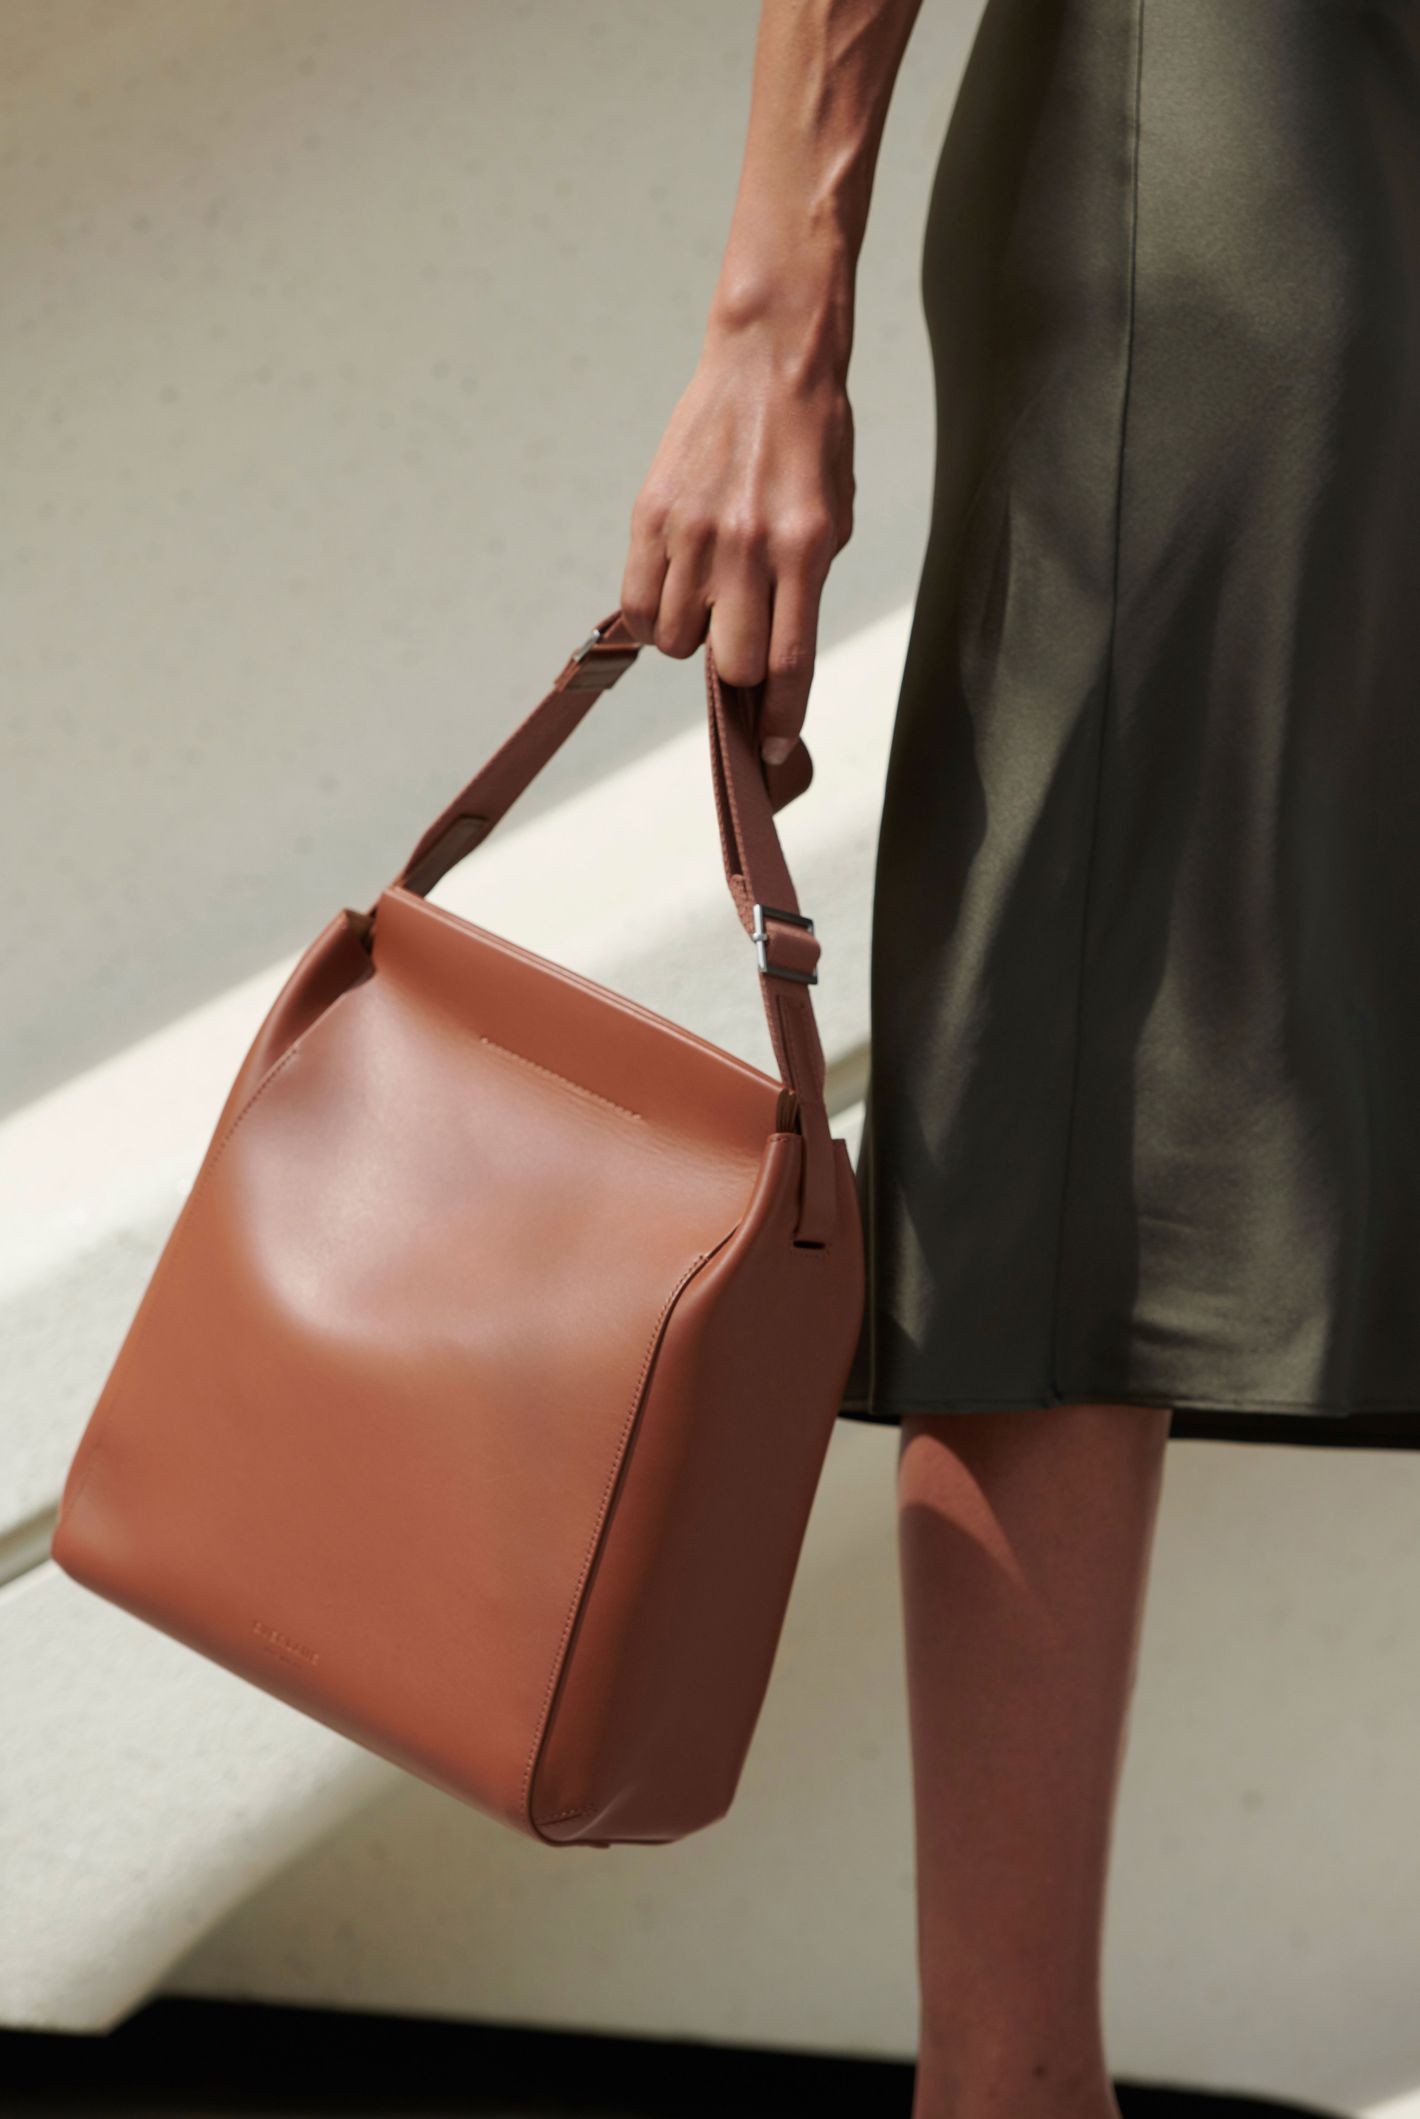 Everlane The Form Bag is the Perfect Work and Laptop Handbag